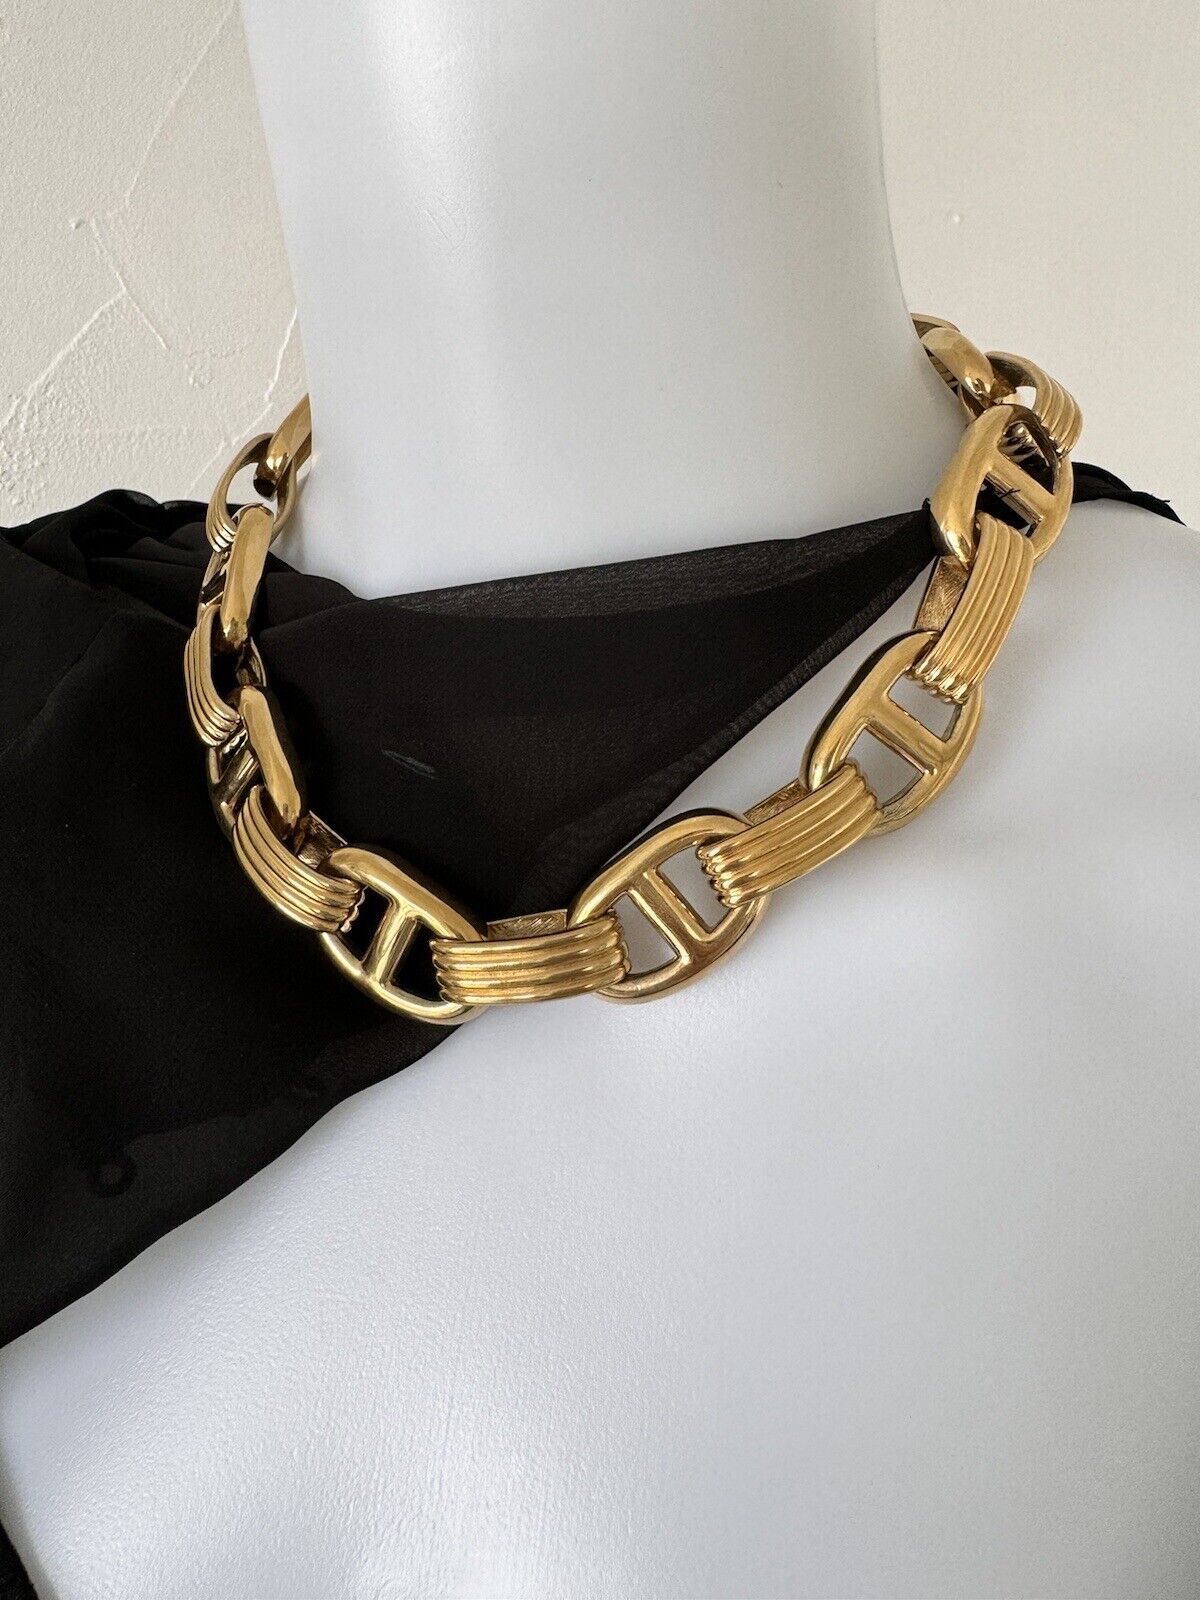 Givenchy Necklace Link Chain Gold Tone Anchor Chain Unisex Vintage